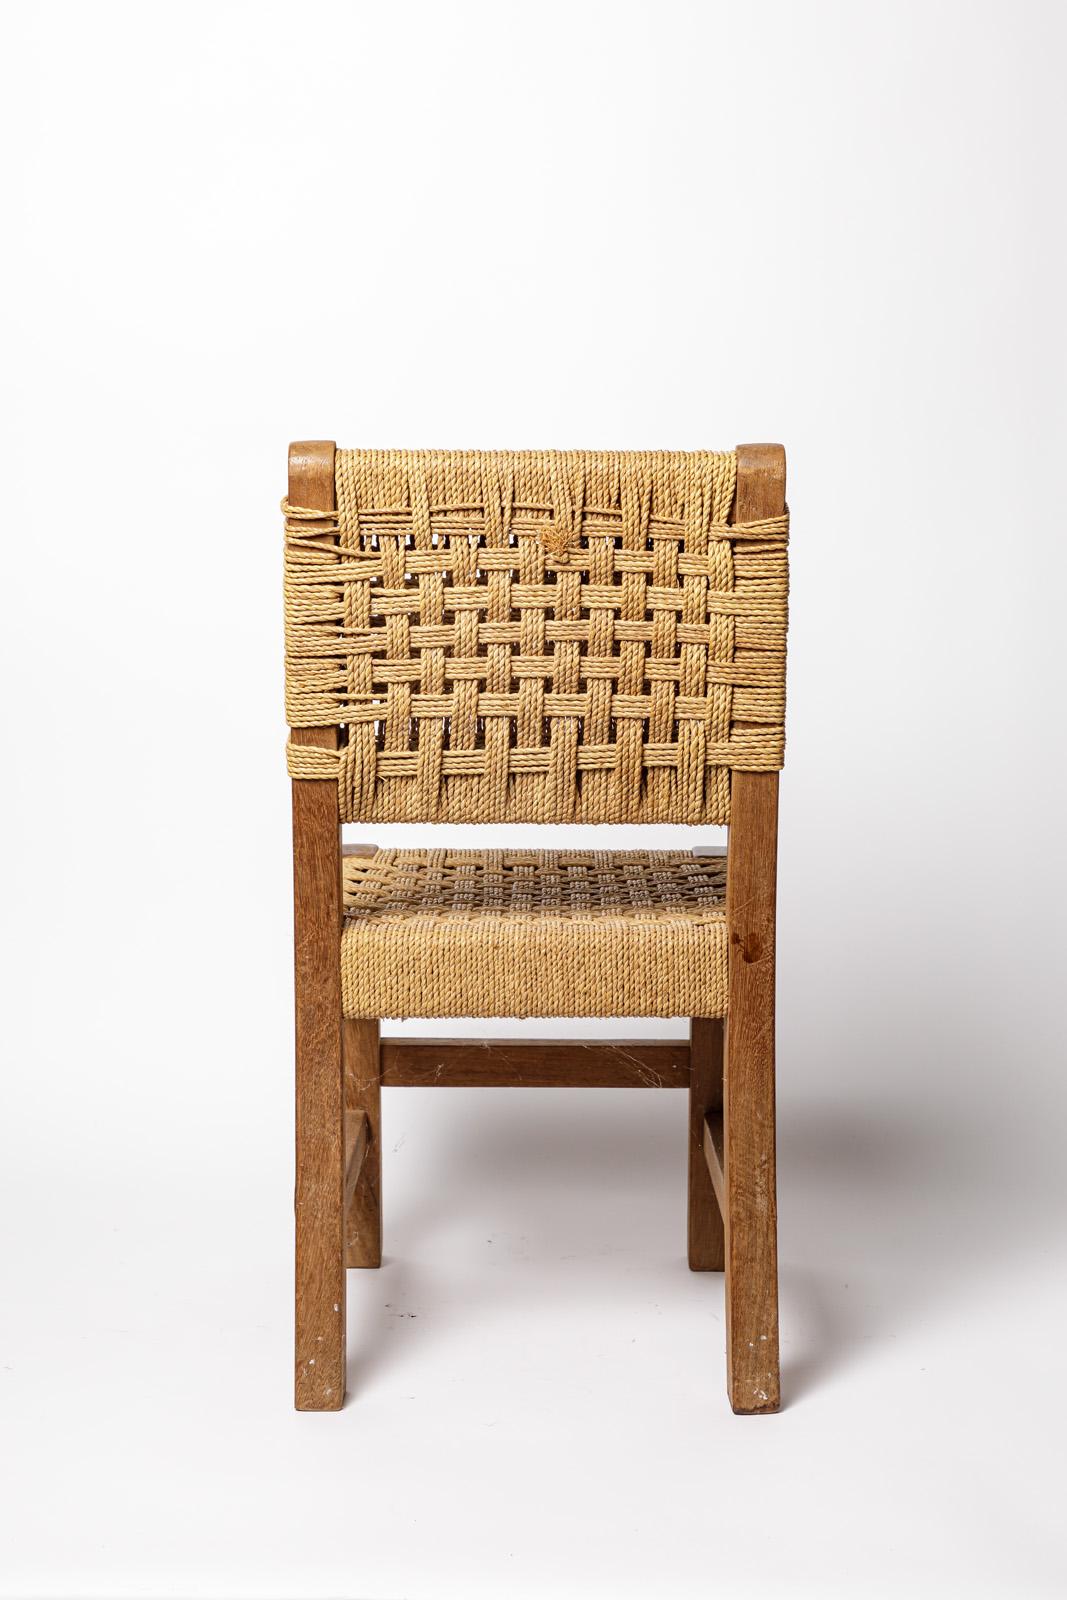 20th Century 20th century children wood and cord design chair style of AUdoux Minnet design For Sale